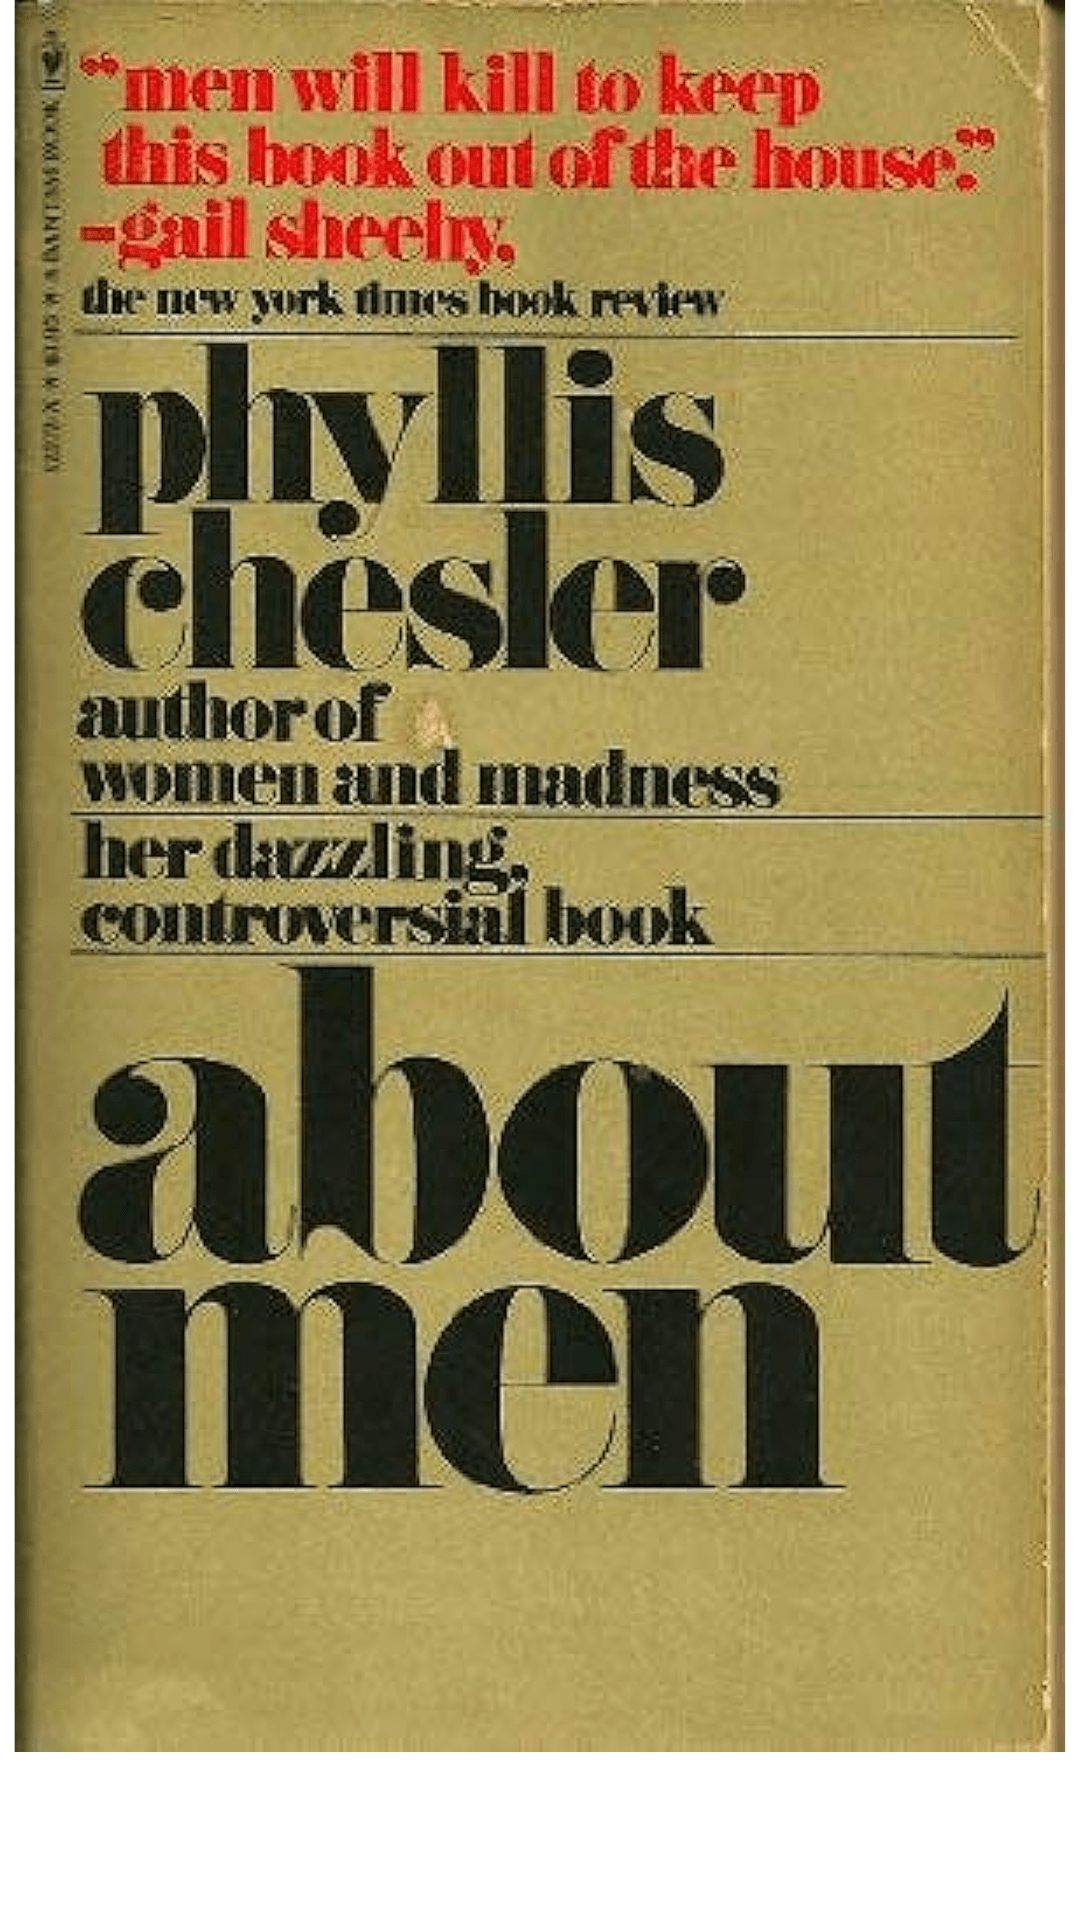 About Men by Phyllis Chesler